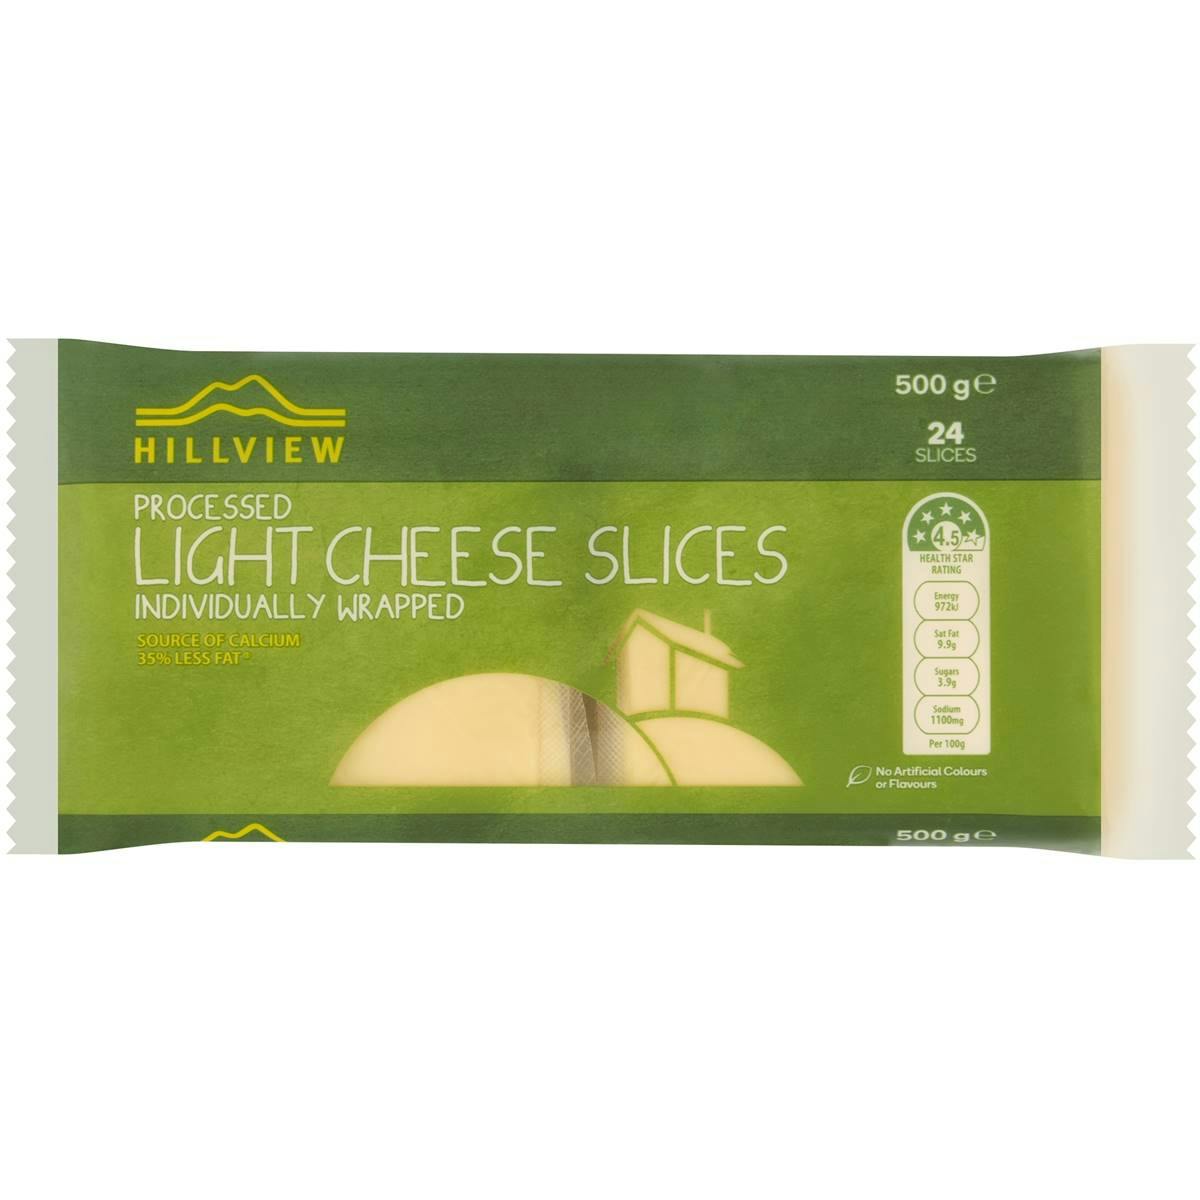 Hillview Light Cheese Slices